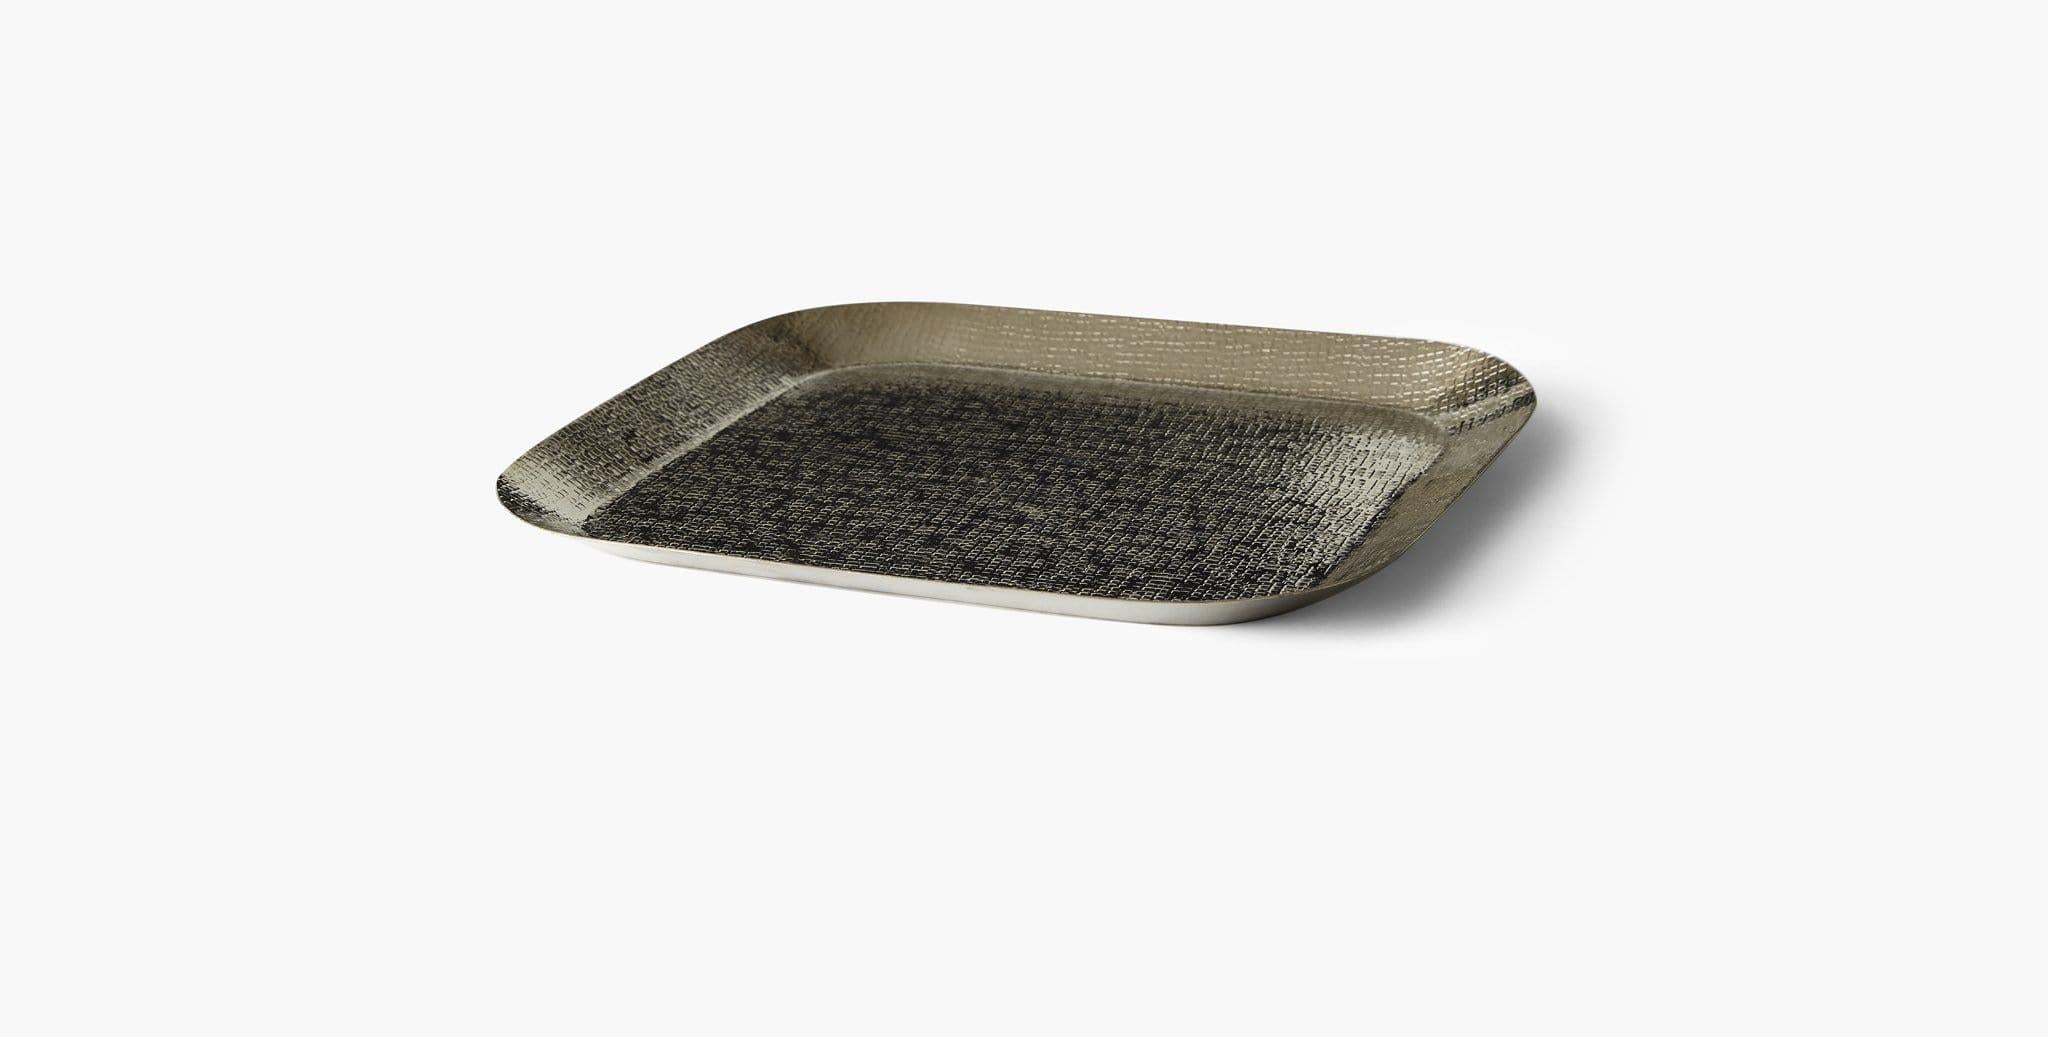 Our Corba Platter provides an elegantly rounded square backdrop for curated objects. Place it on a side or entry table for a bold textural accent. Our handcrafted finishes are inspired by variations within natural textures. Each selection is